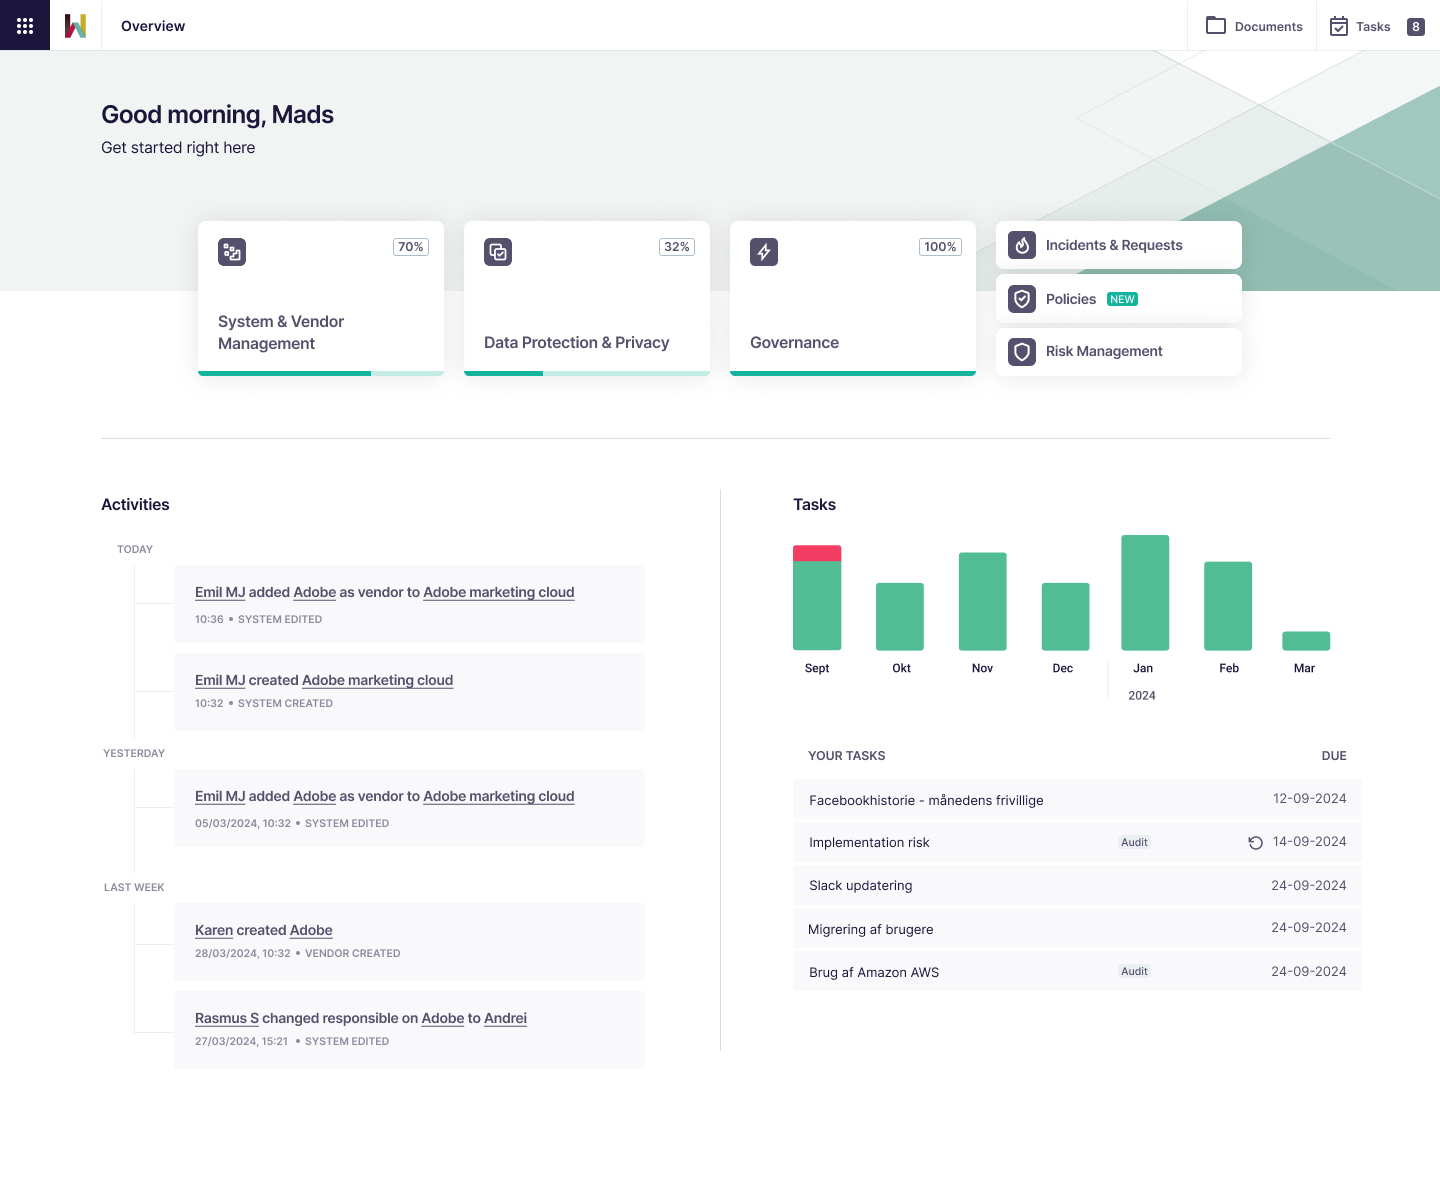 Dashboard for control and overview. See your task workload across months to plan your work better across people and departments.